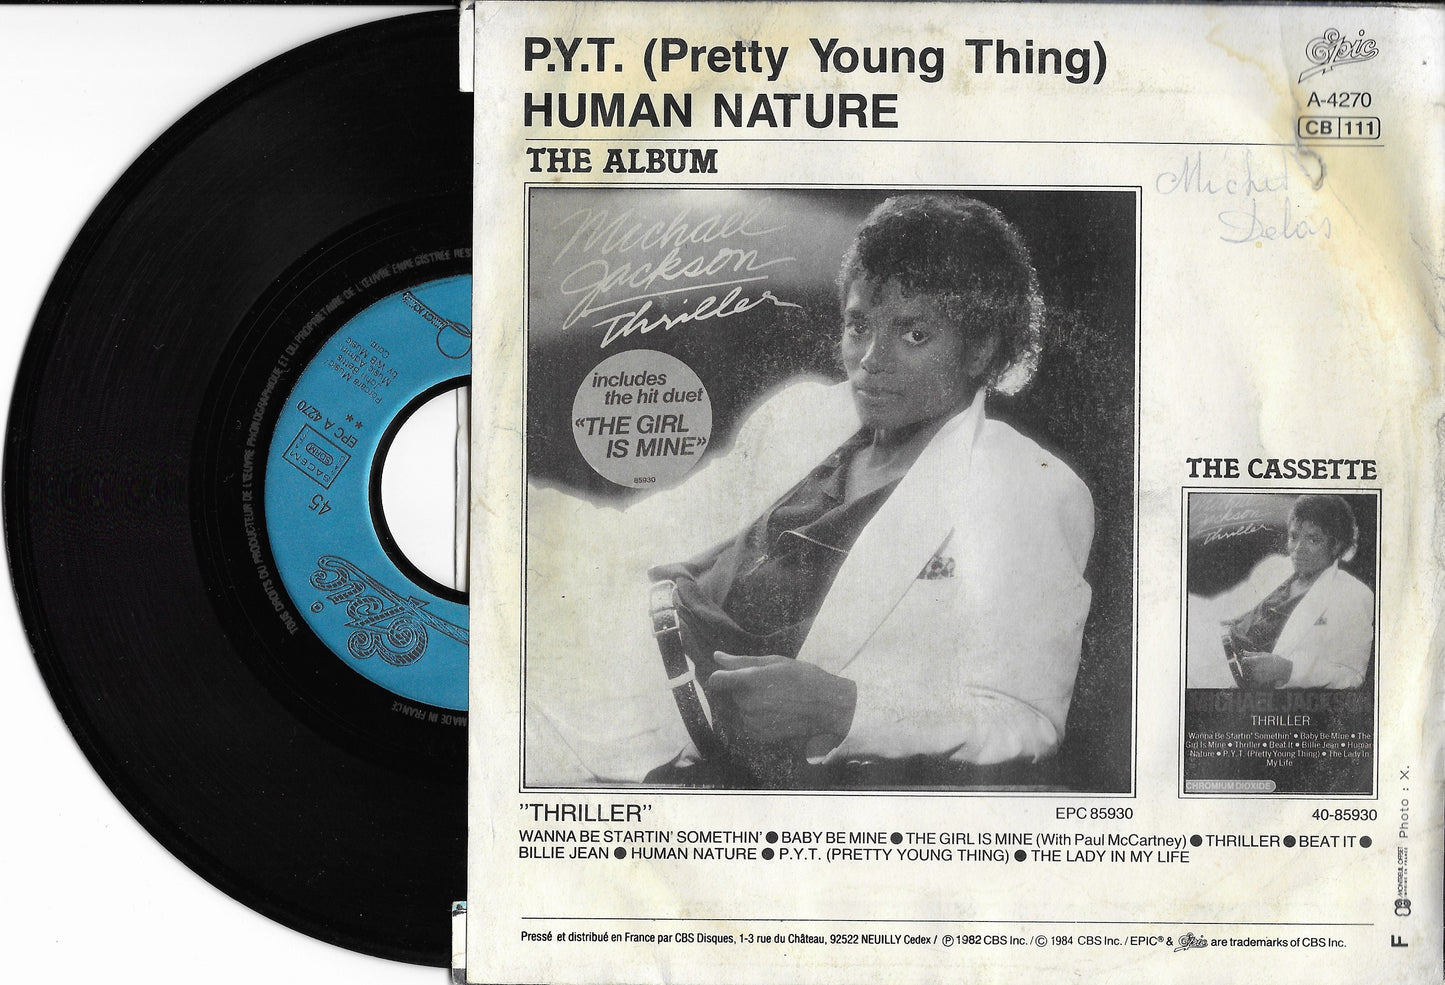 MICHAEL JACKSON - P.Y.T. (Pretty Young Thing)